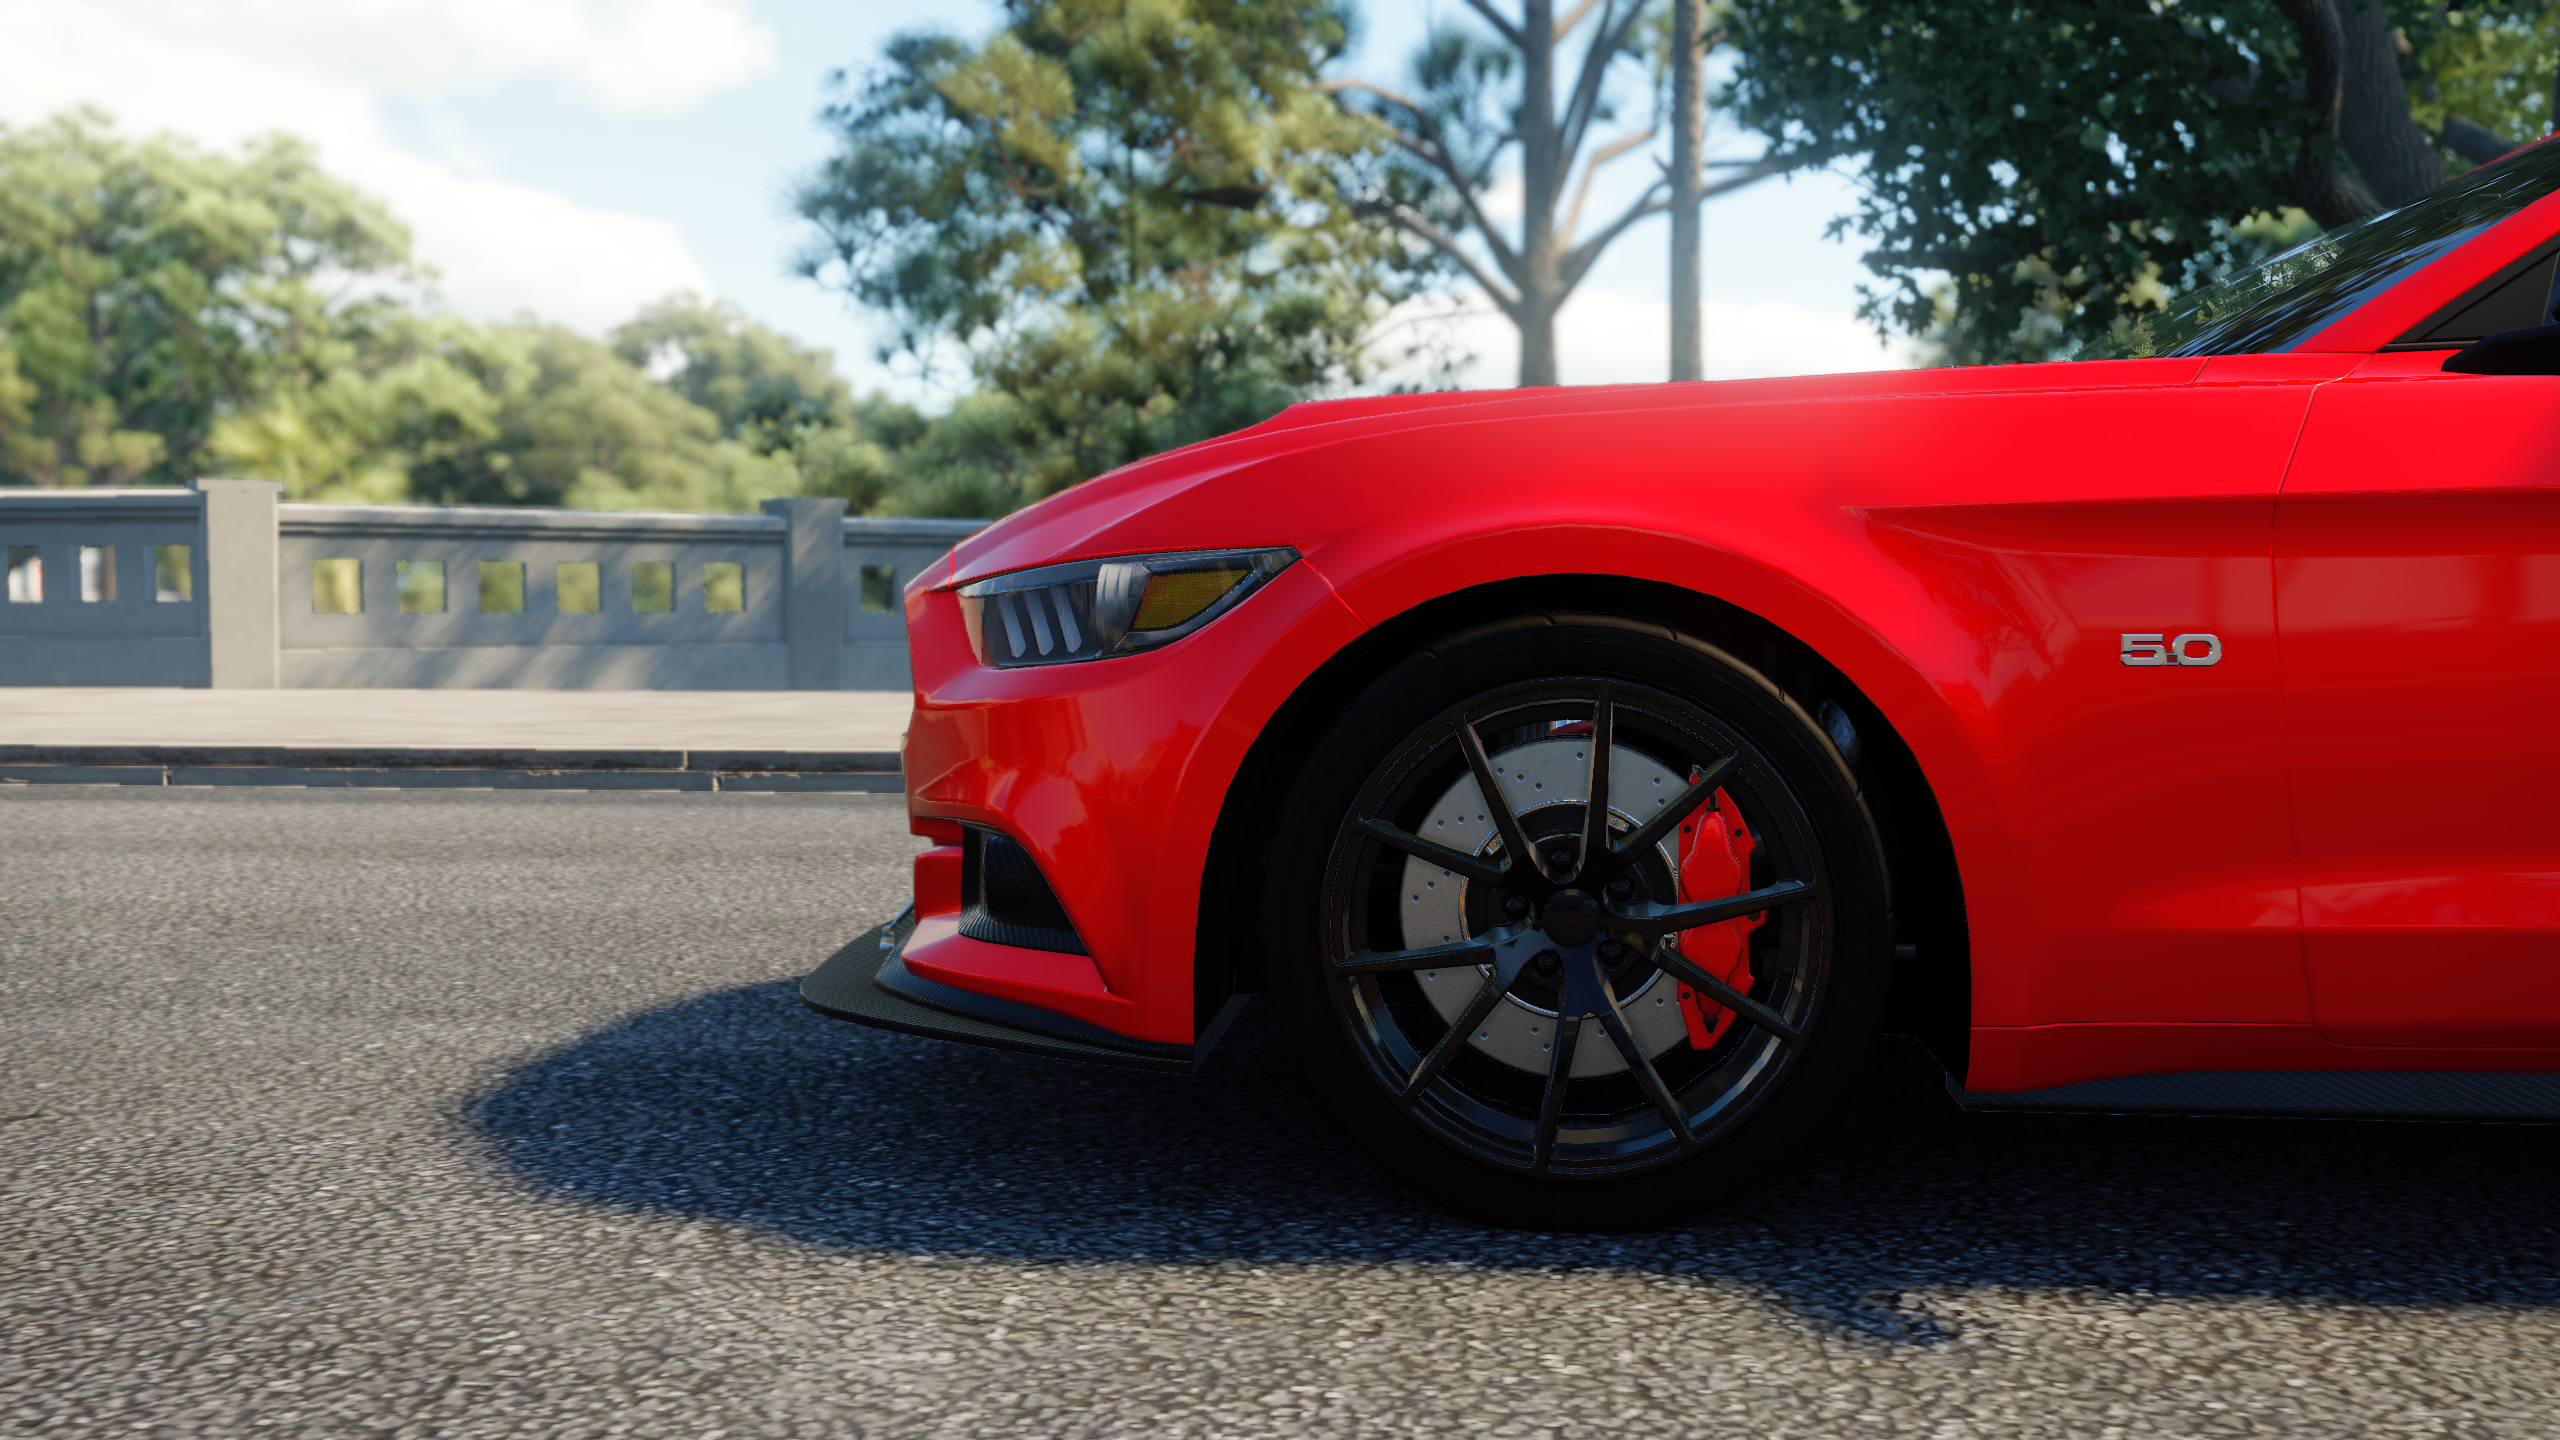 General 2560x1440 Ford Mustang The Crew car nitro Ford red cars vehicle video games Ford Mustang S550